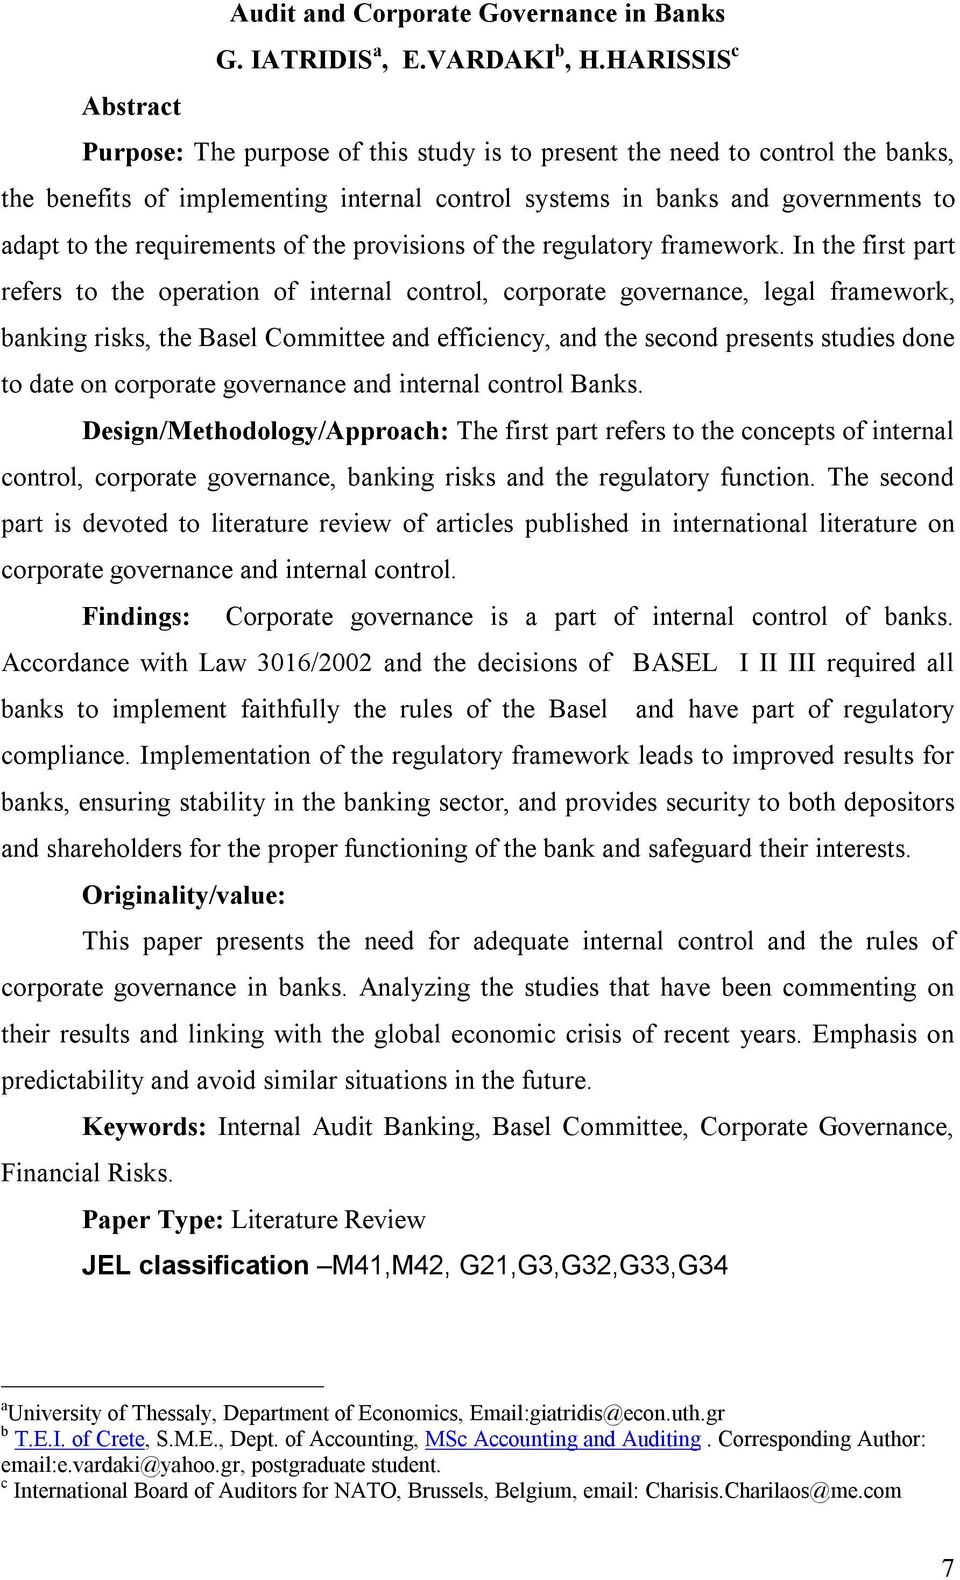 requirements of the provisions of the regulatory framework.